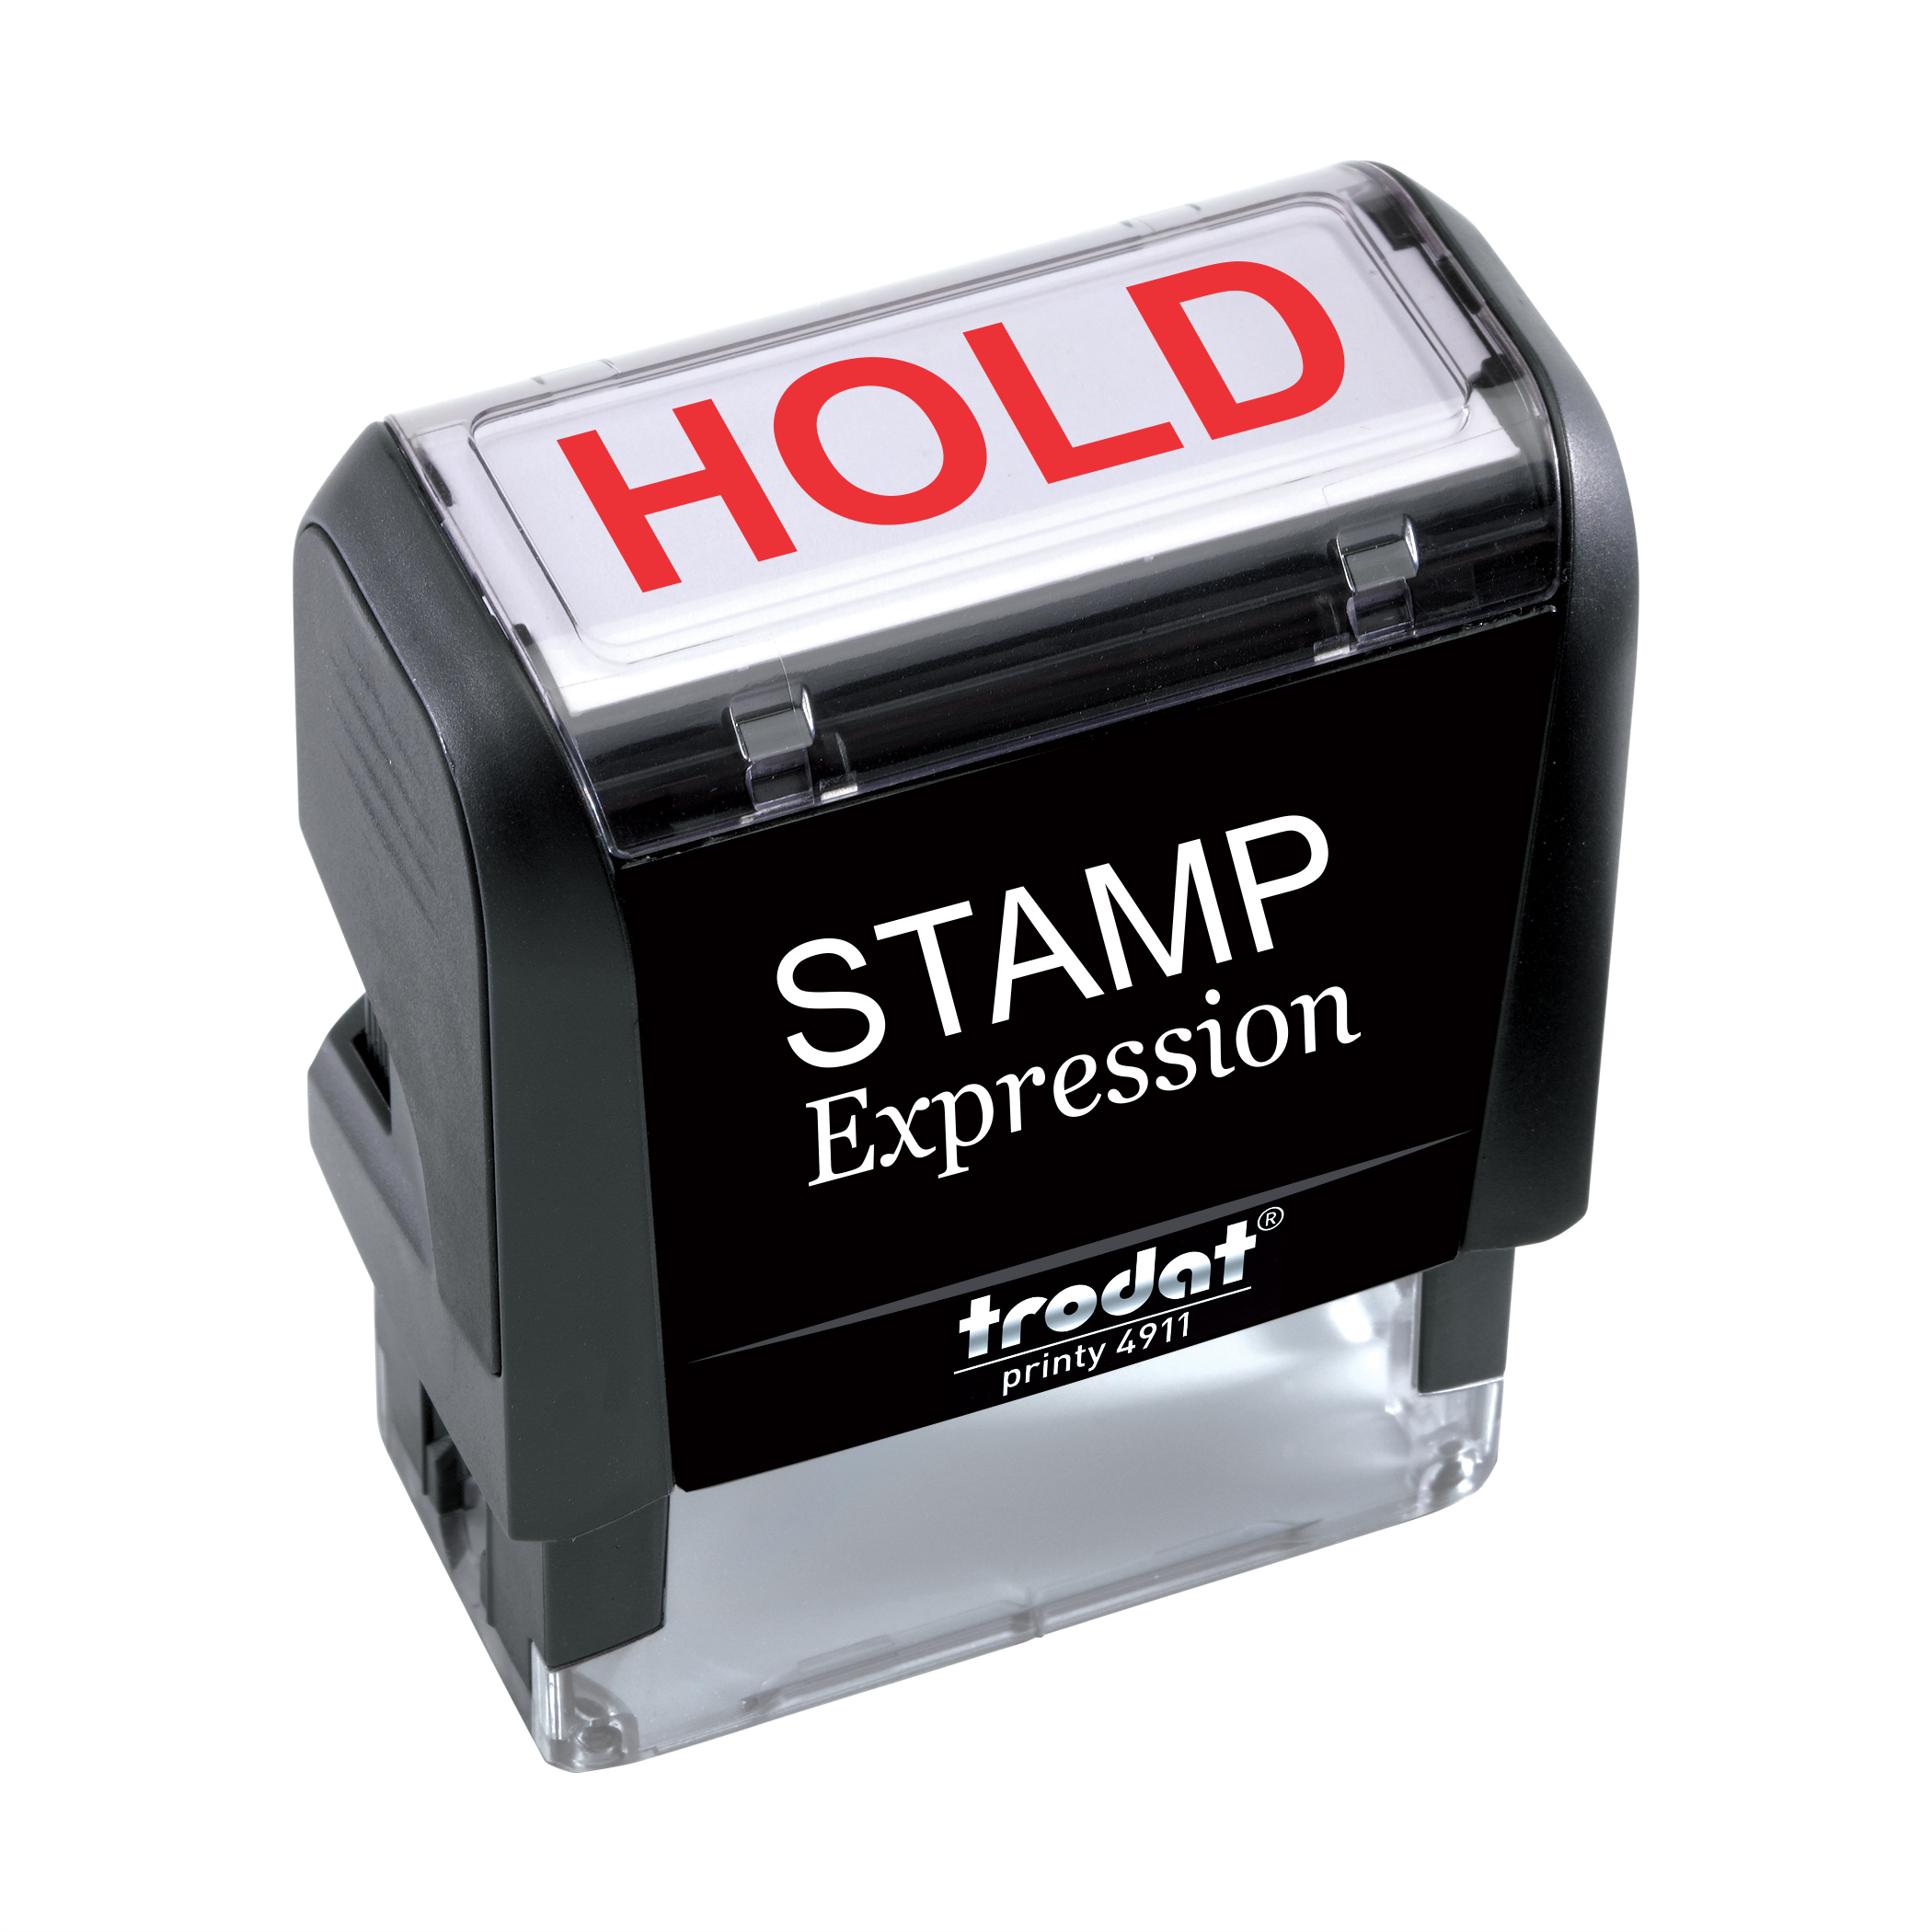 Hold Office Self Inking Rubber Stamp